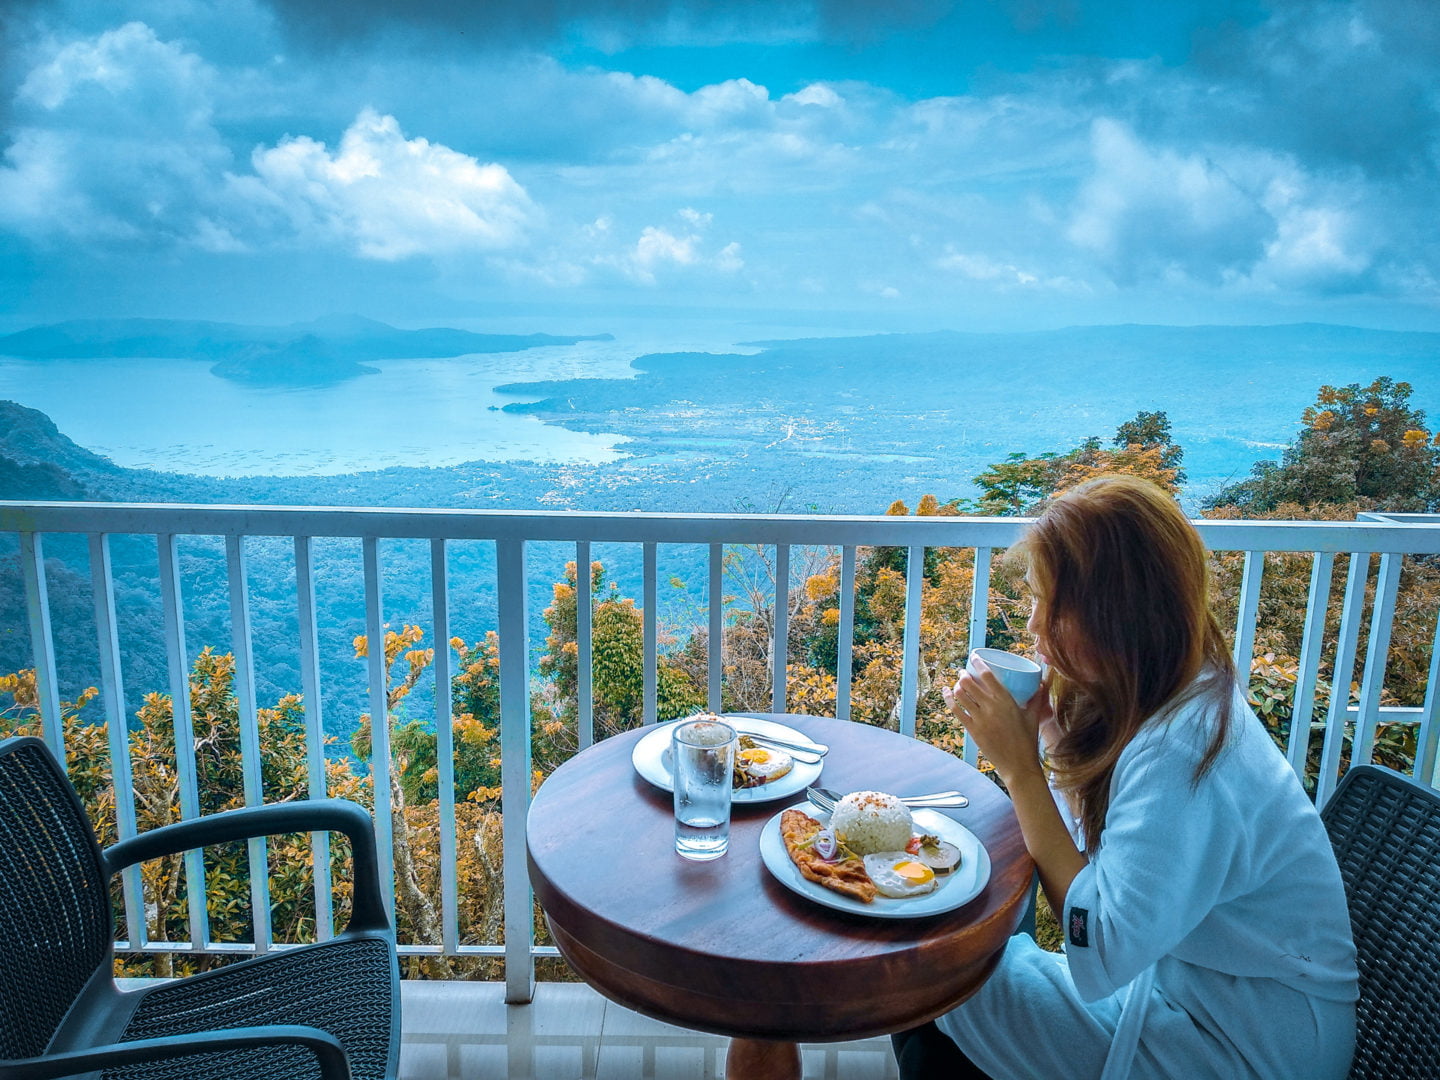 Win an Overnight Staycation at L & J Bistro Tagaytay!